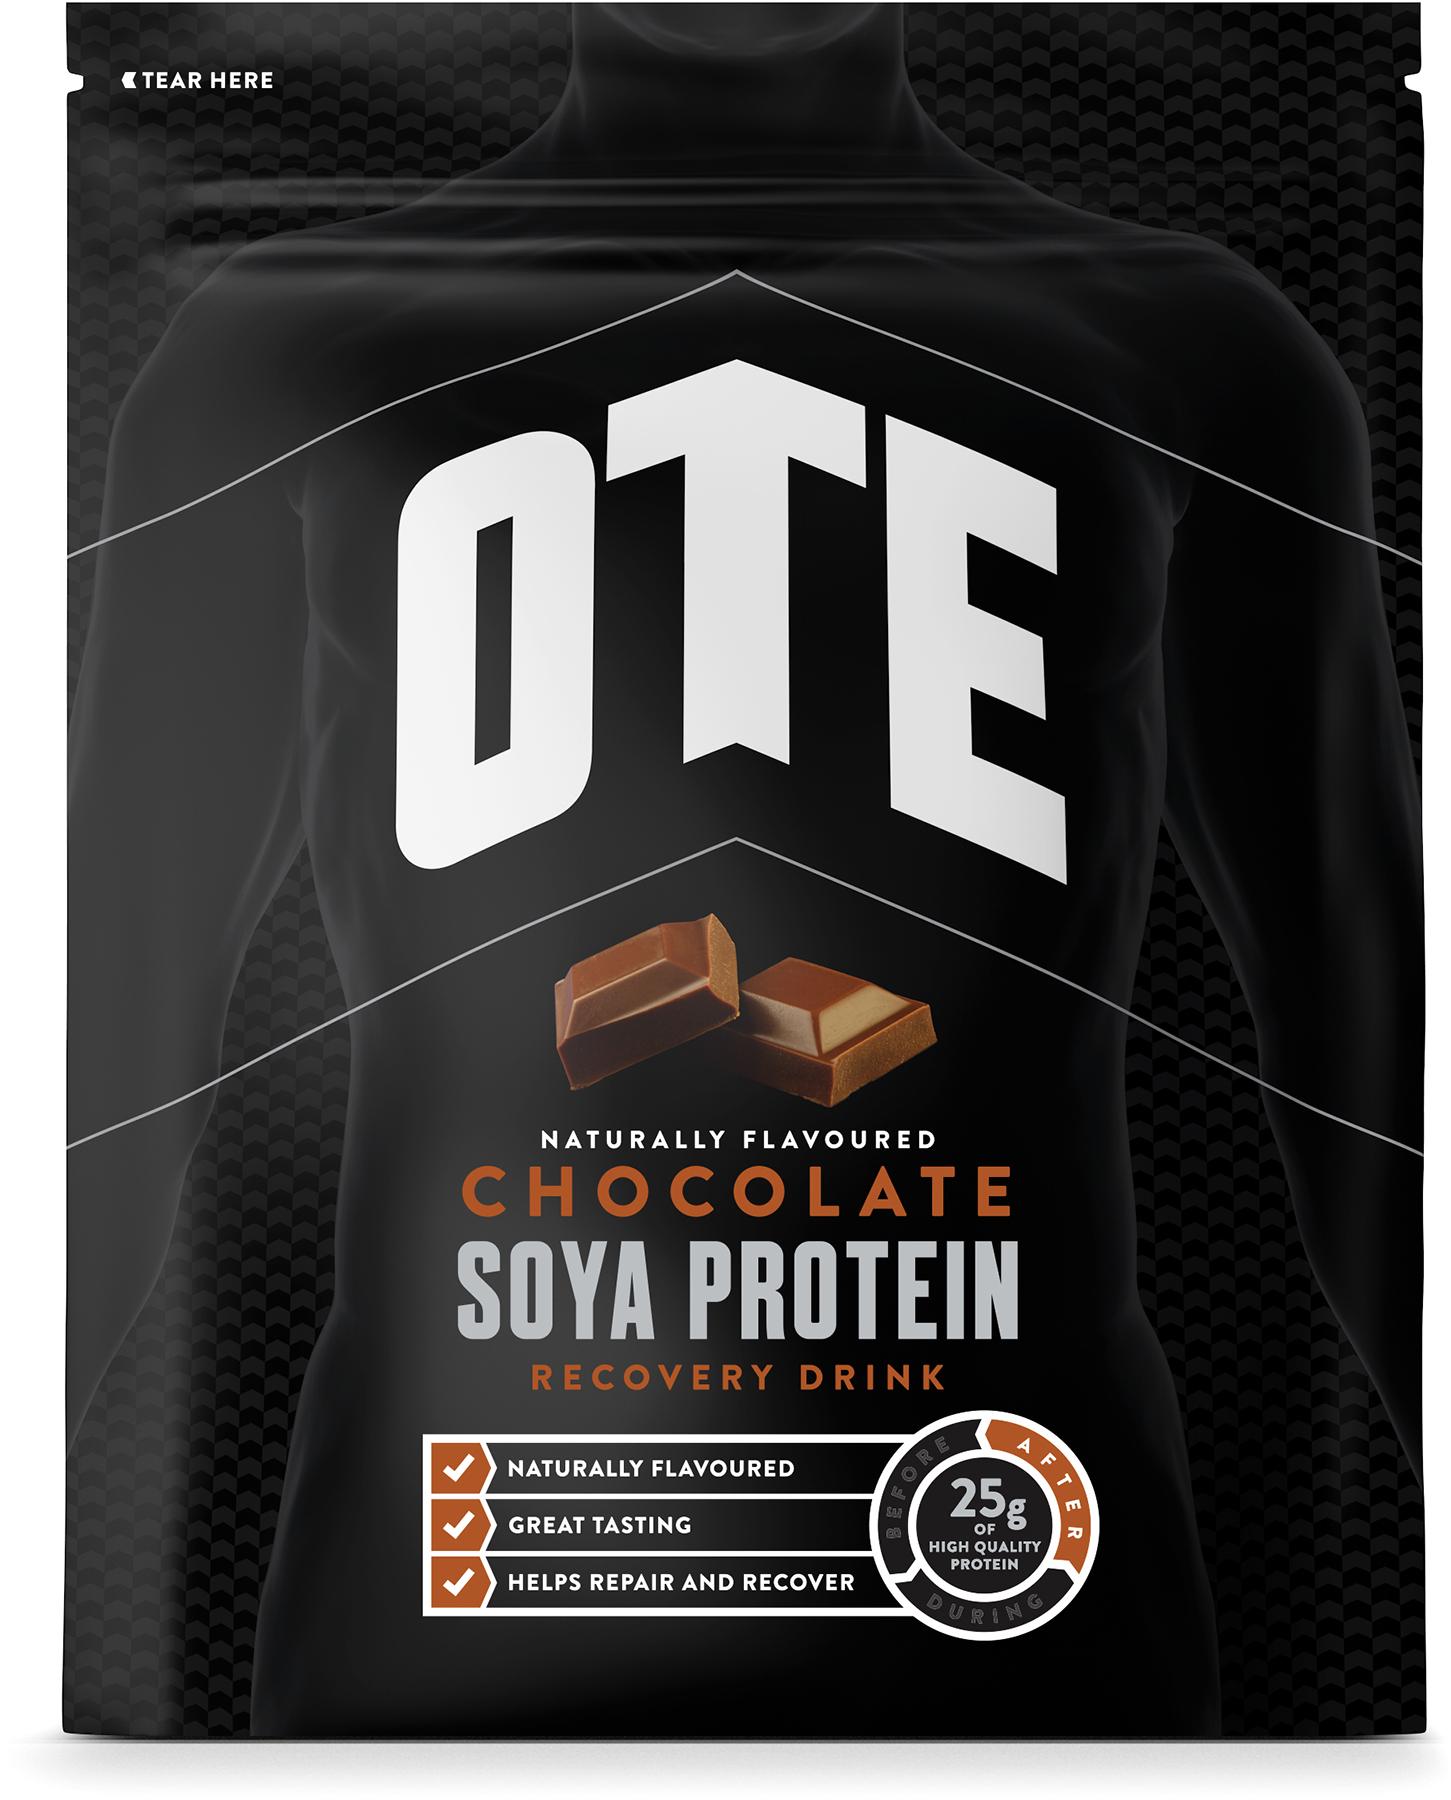 Ote Soya Recovery Drink 1kg